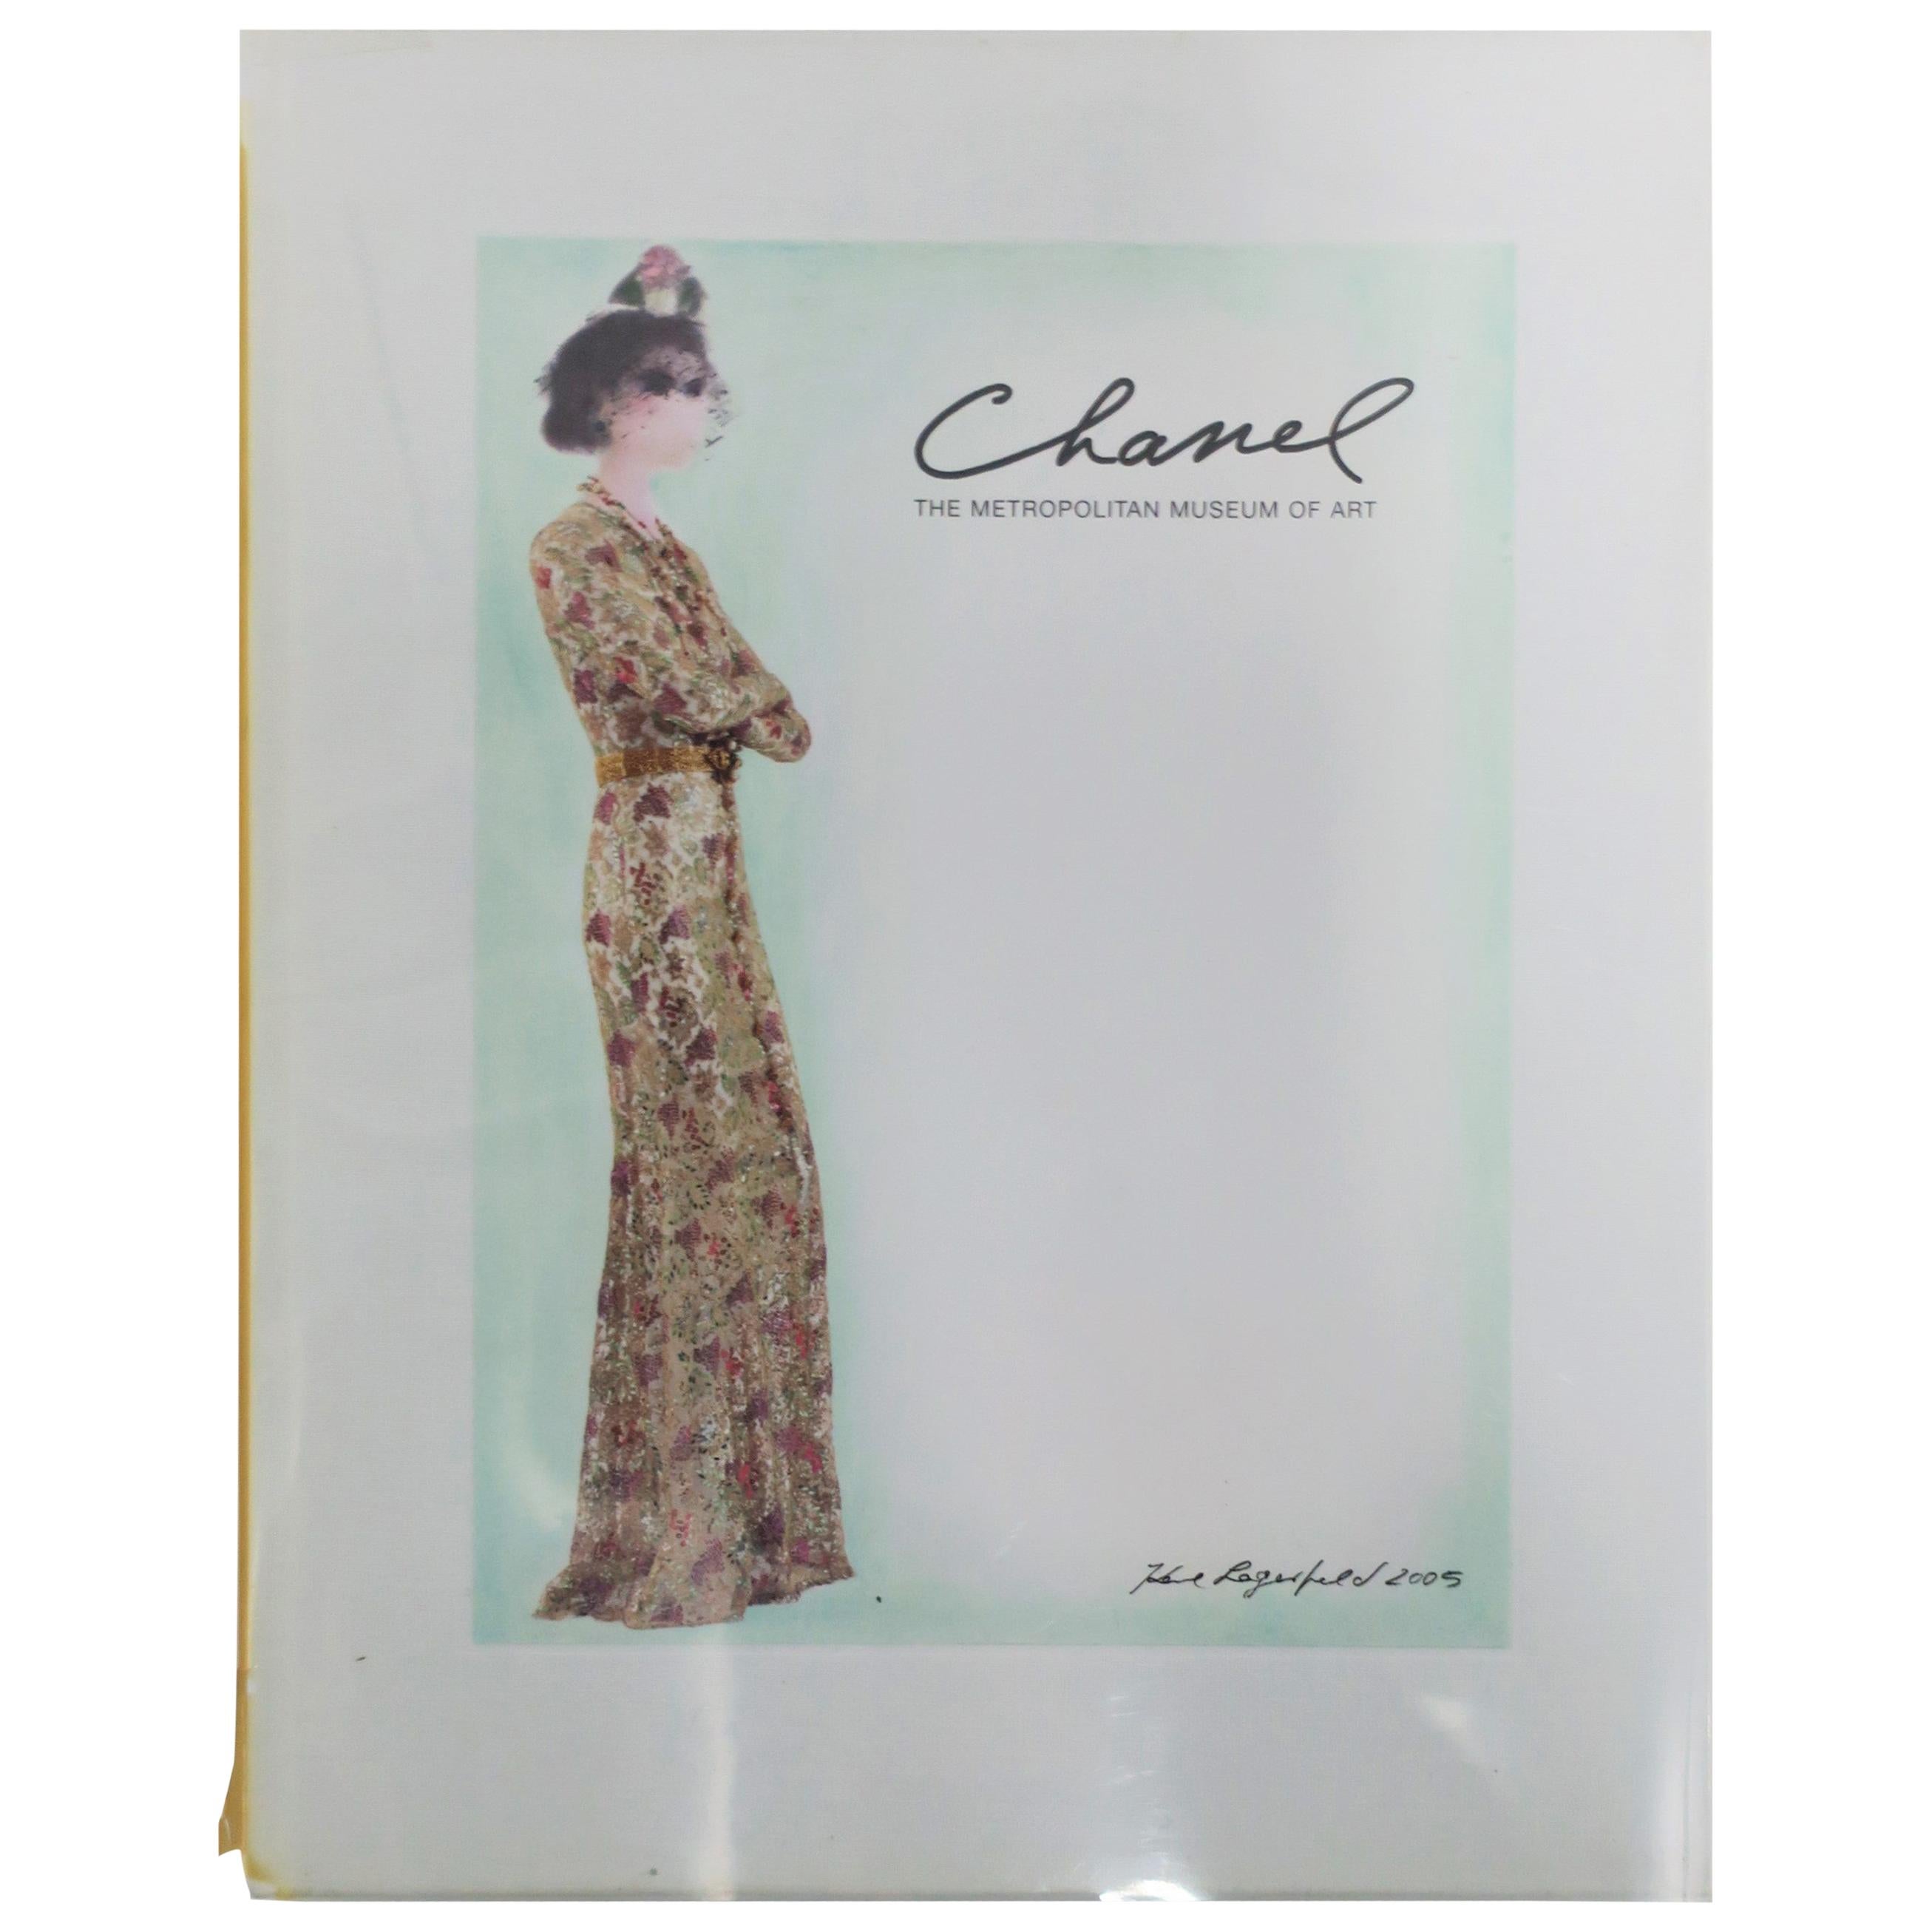 Chanel The Metropolitan Museum of Art Coffee Table or Library Book